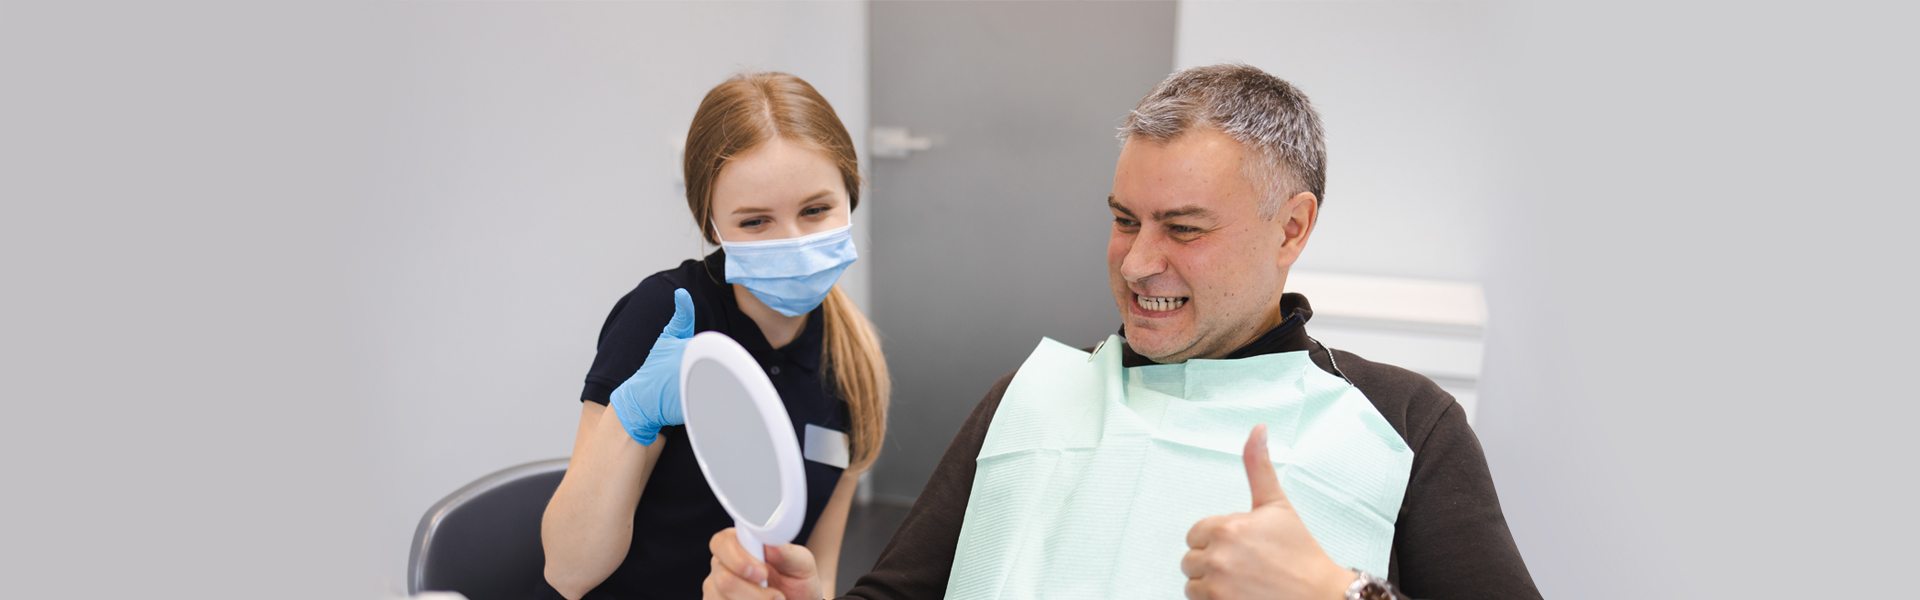 Family Dentistry Services: Comprehensive Care for All Ages